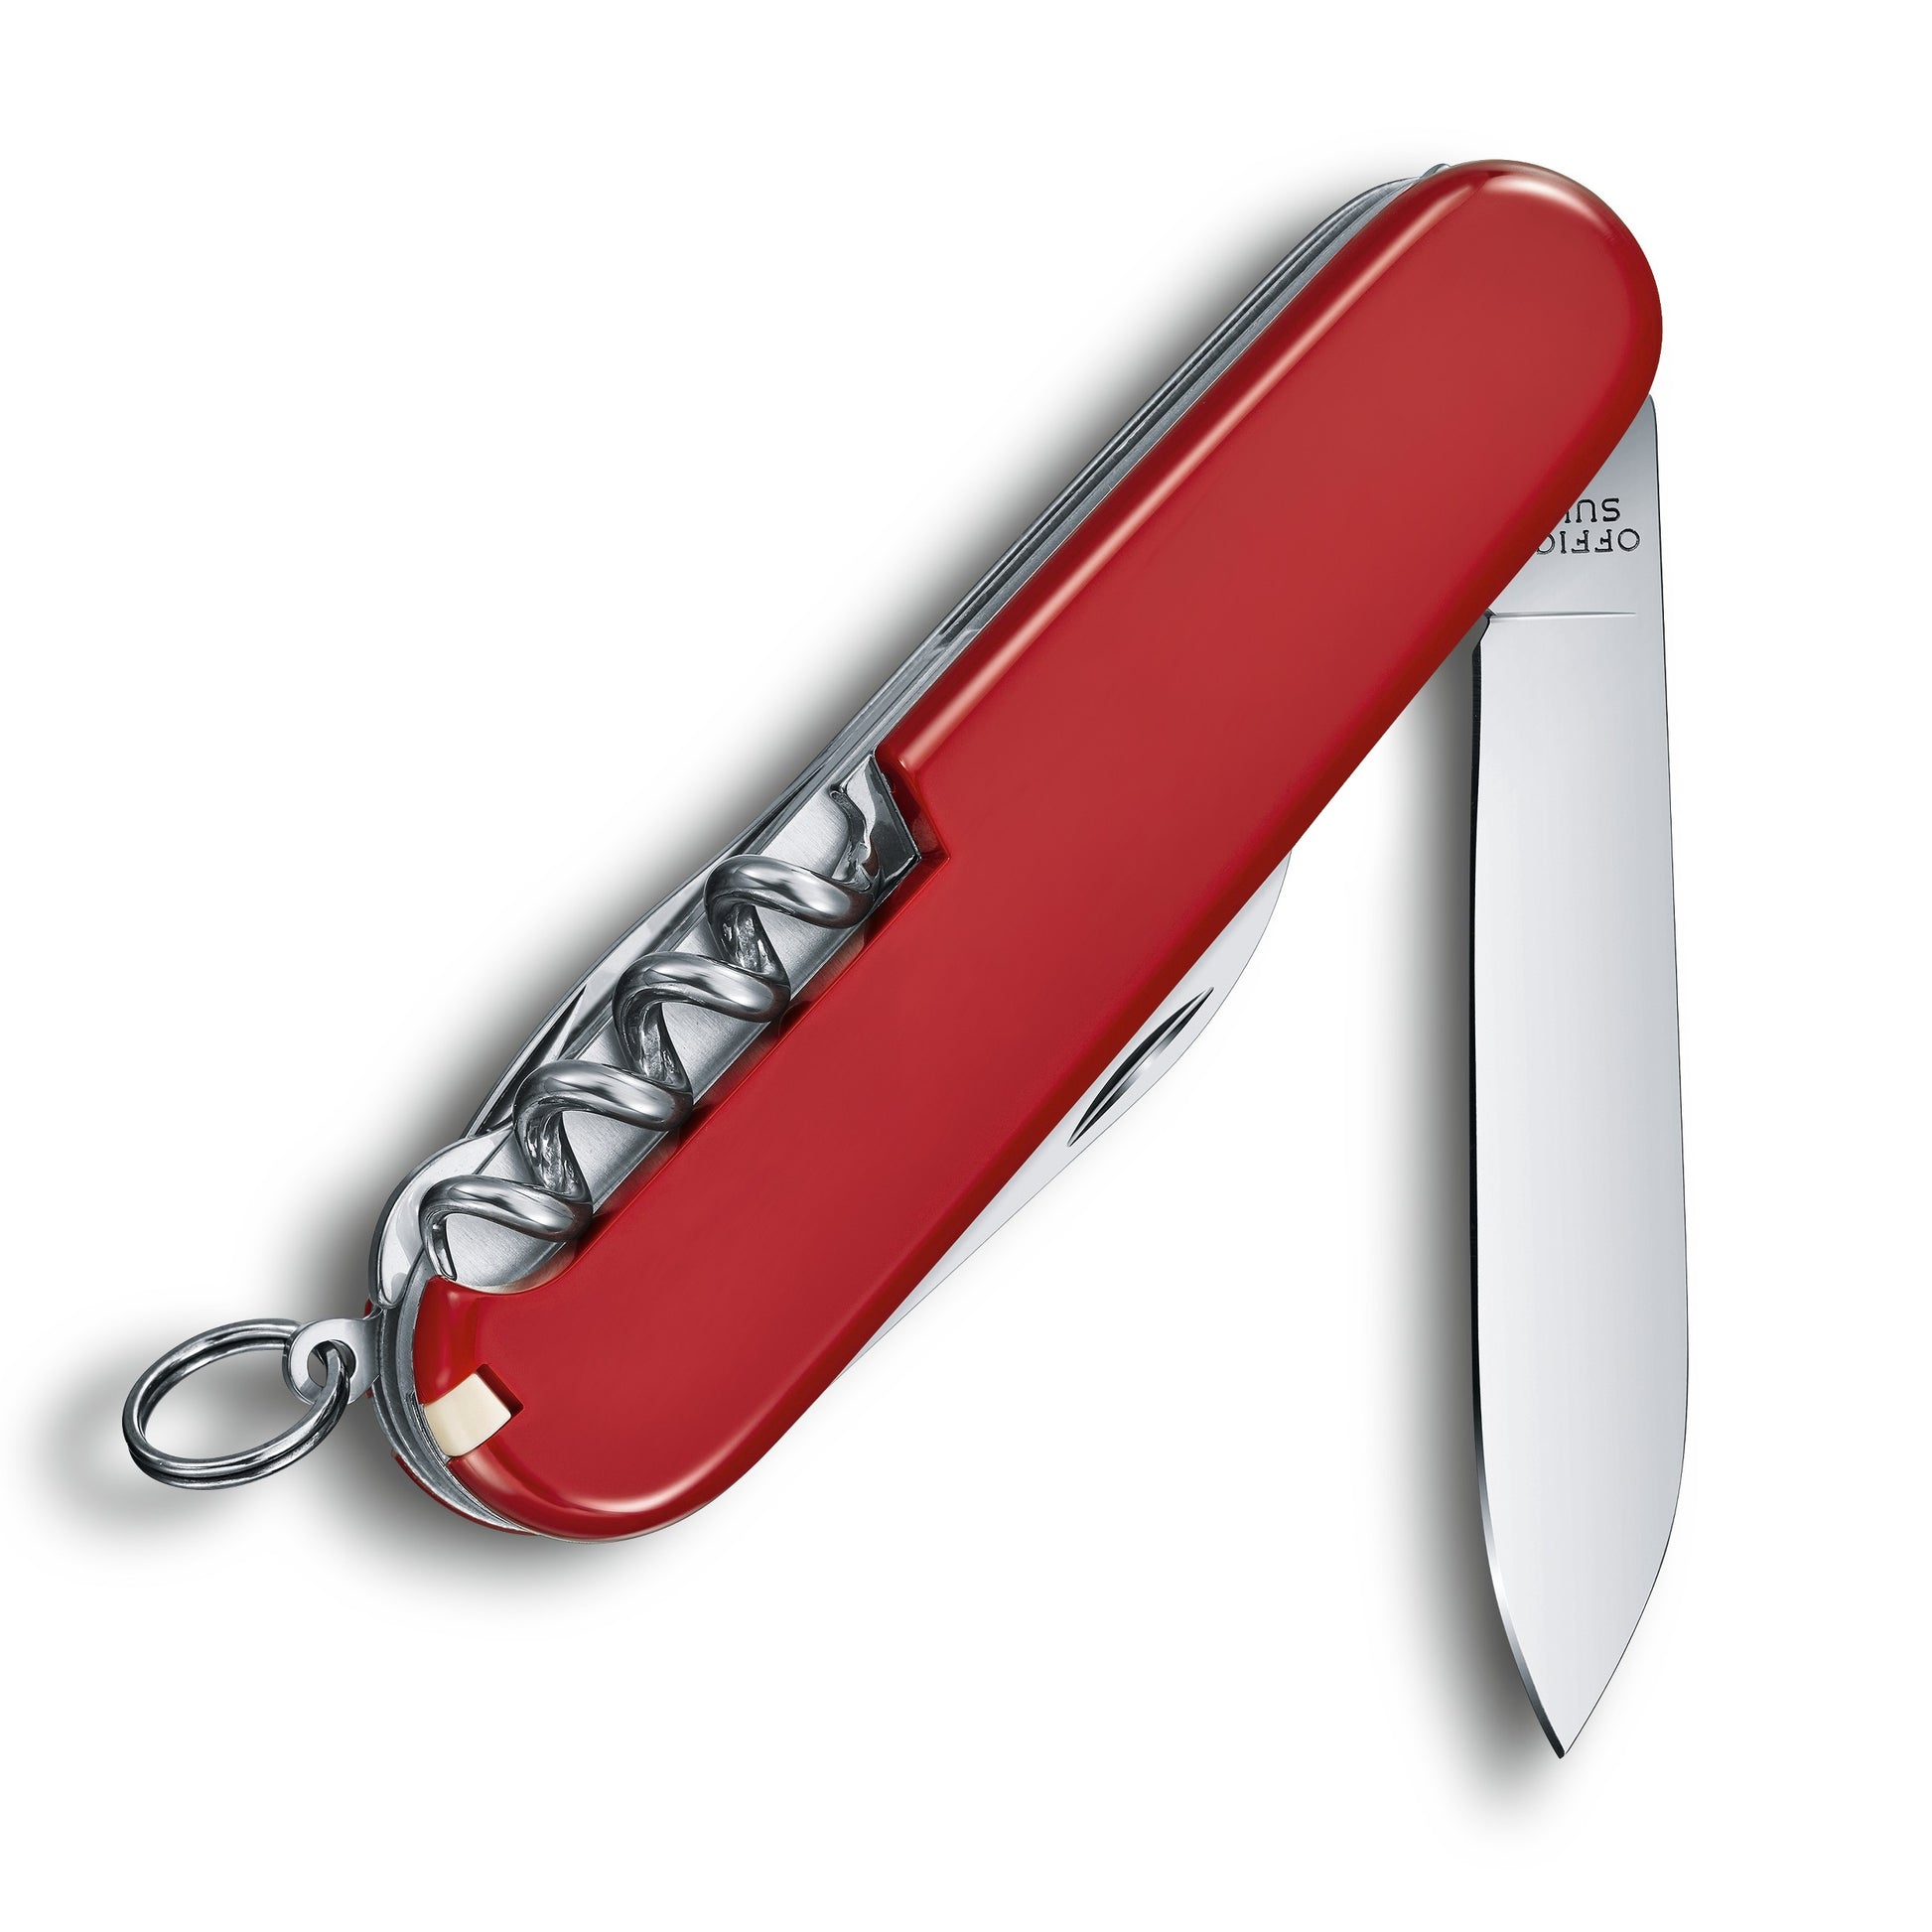  Victorinox Spartan Serrated 12 Function Swiss Army Knife - Red  : Folding Camping Knives : Sports & Outdoors